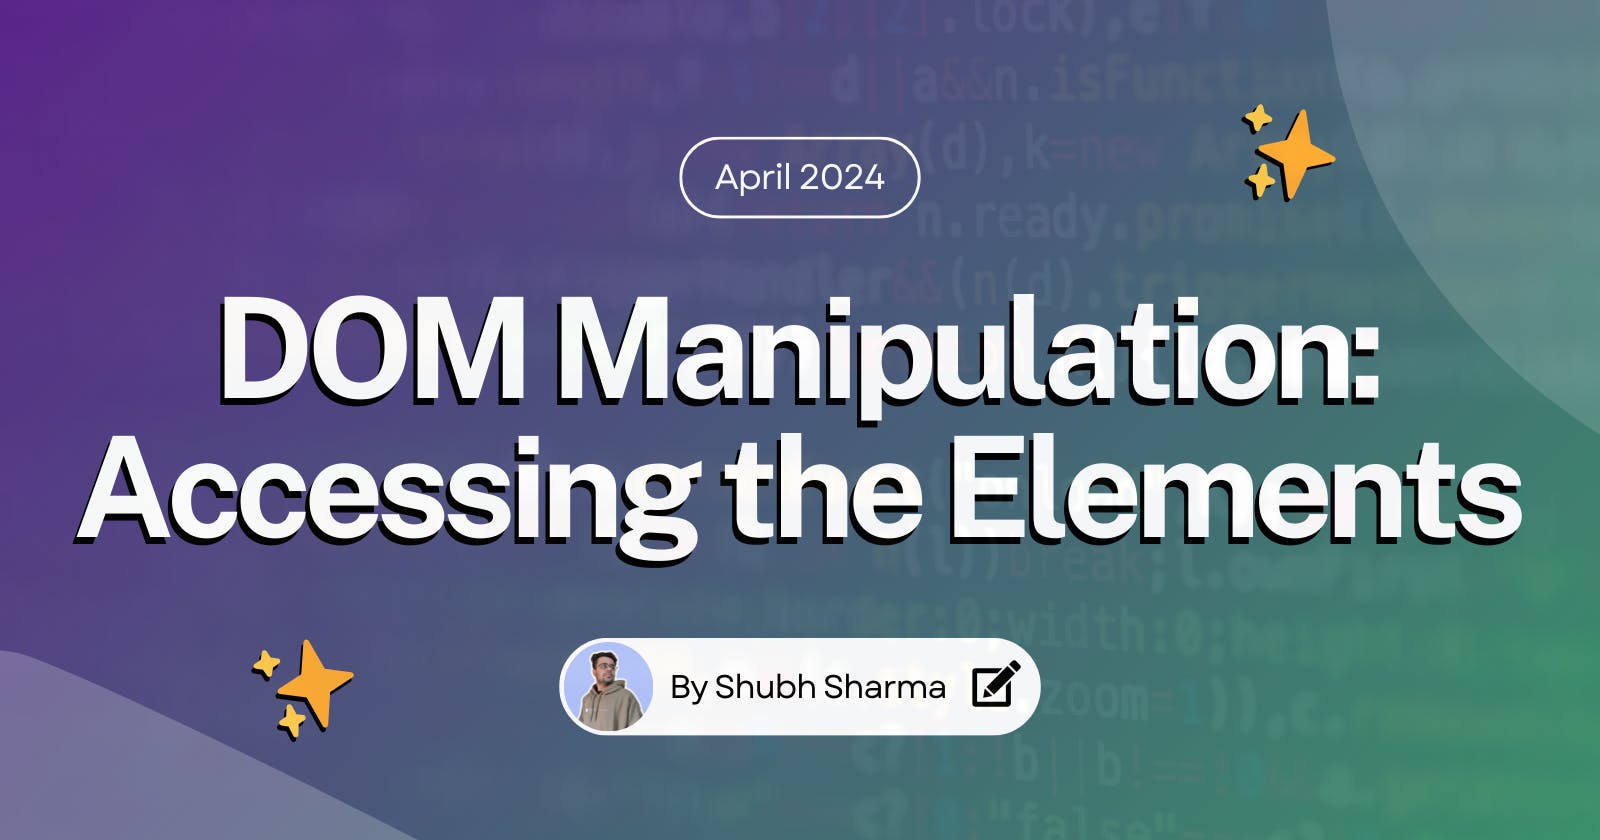 DOM Manipulation: Accessing the Elements of the Webpage.